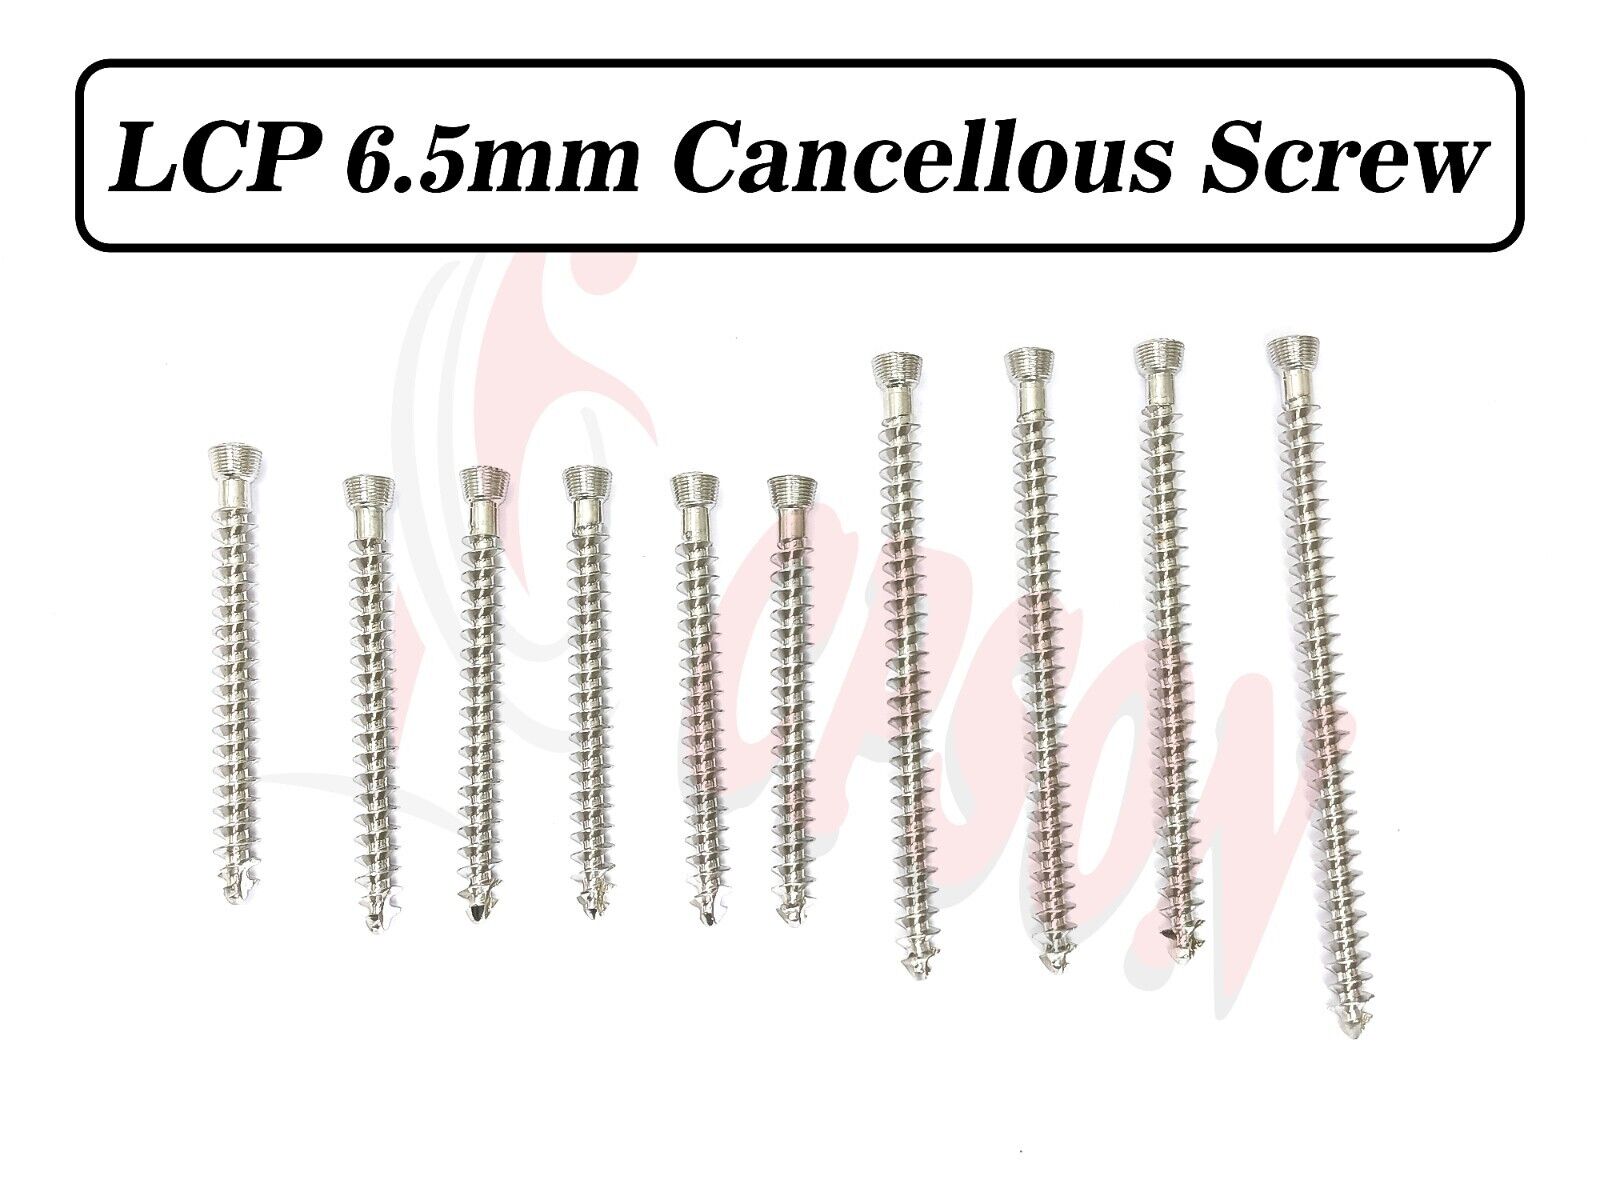 Veterinary 6.5mm LCP Cancellous Screw Lot of 55pcs Stainless Steel.